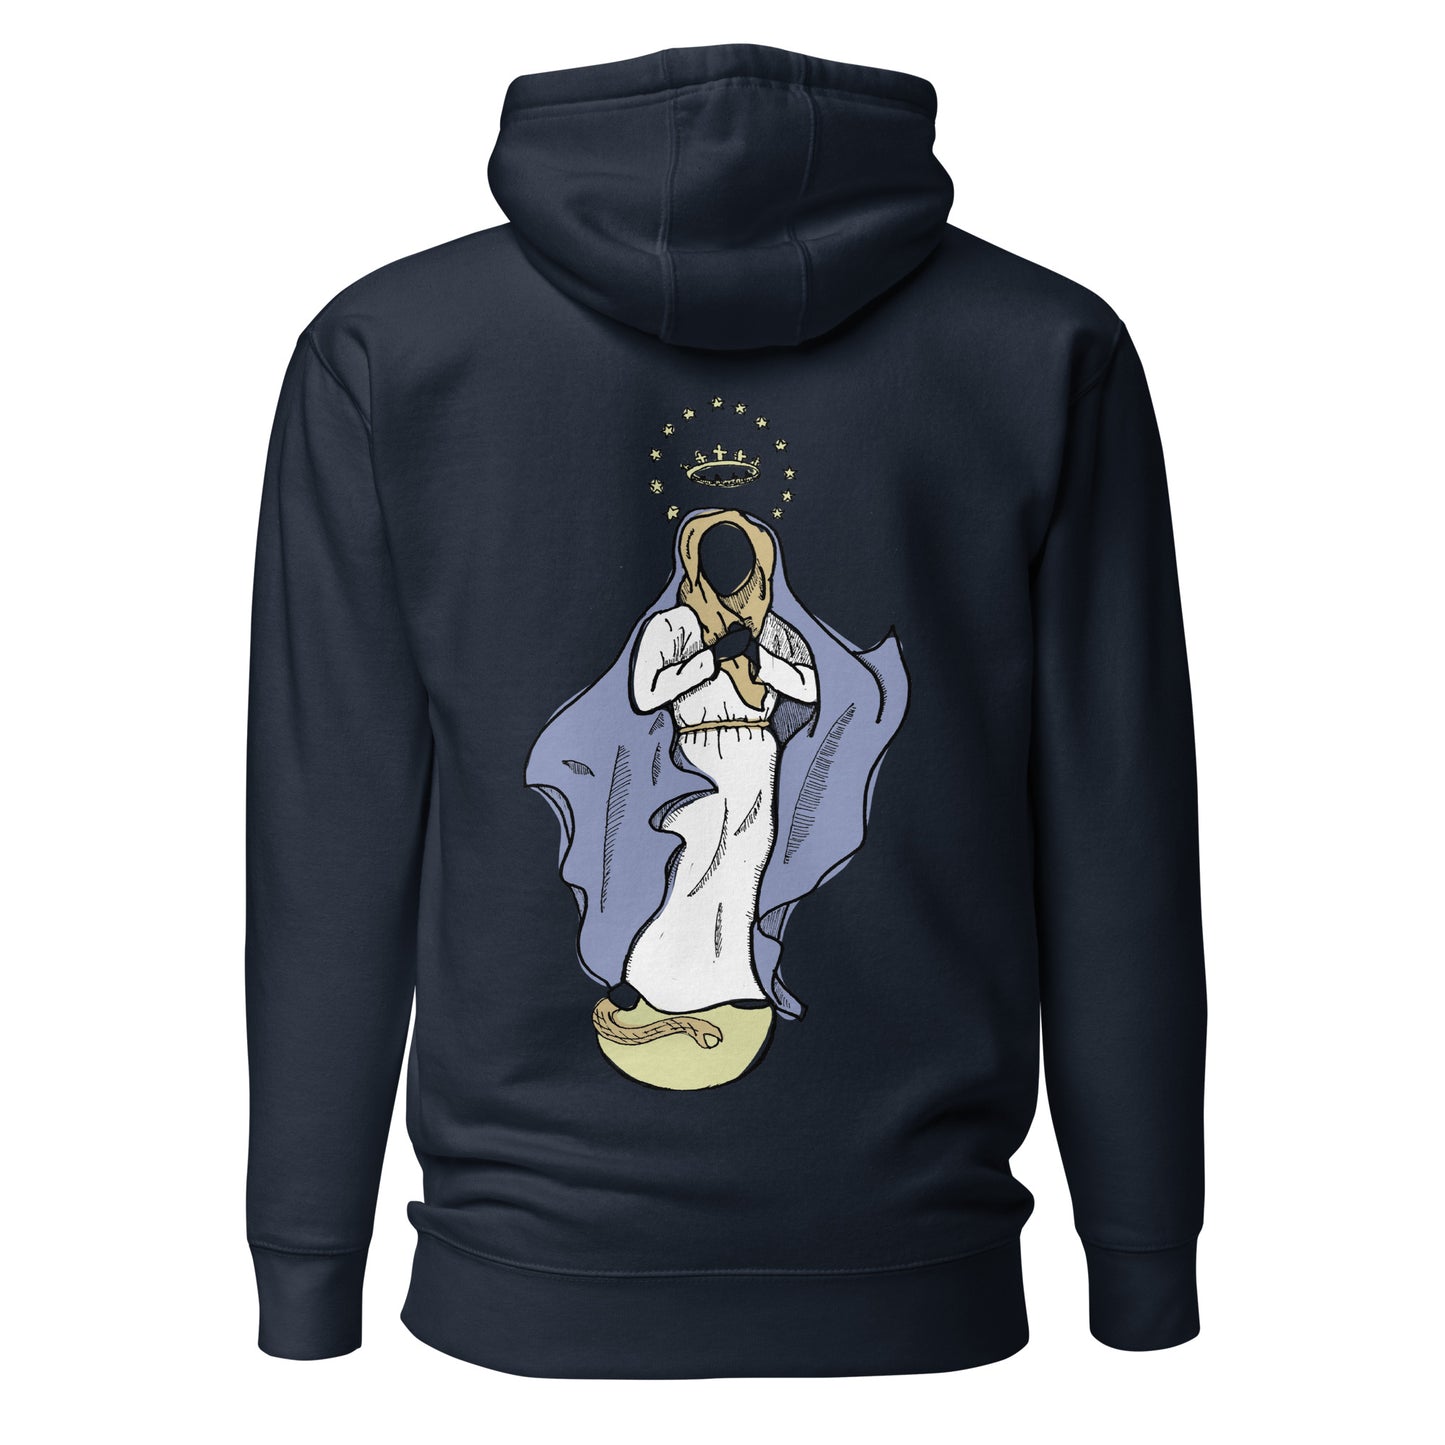 "Our Lady, Queen of Heaven" - Unisex Hoodie